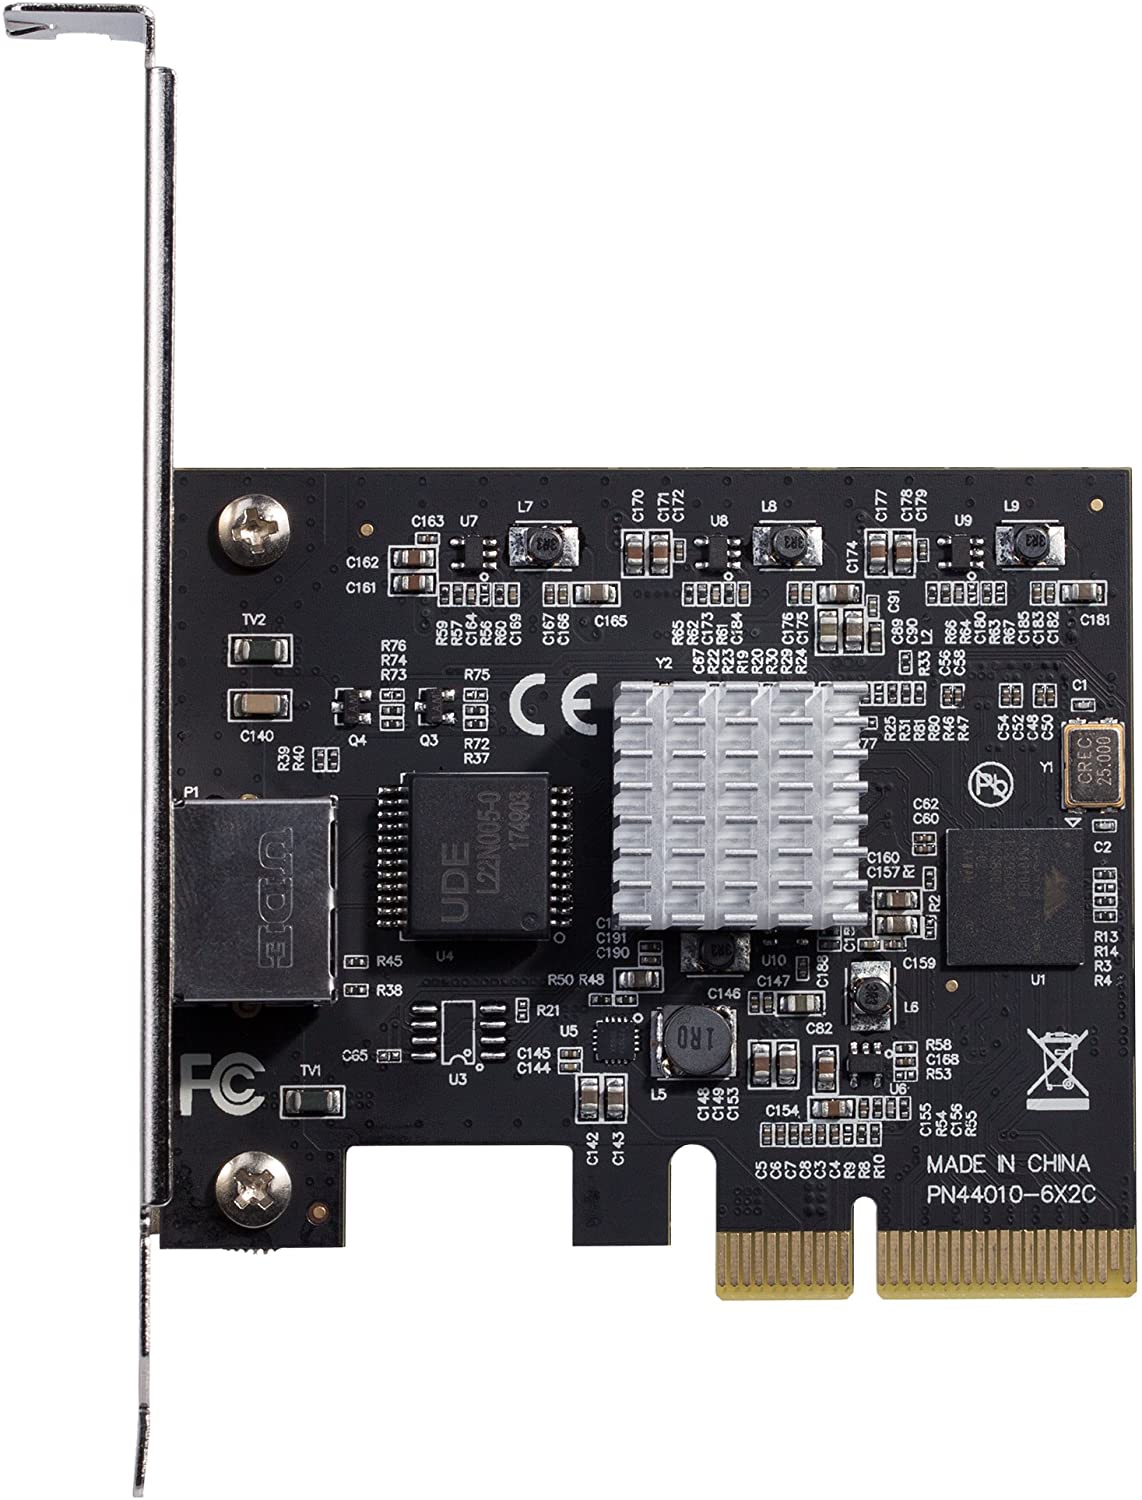 StarTech.com 1 Port PCI Express 10GBase-T/NBASE-T Ethernet Network Card - 5-Speed Network Support: 10G/5G/2.5G/1G/100Mbps - PCIe 2.0 x4 (ST10GSPEXNB) 10 Gigabit Ethernet w/ Nbase-T (10G/5G/2.5G/1G/100Mbps) PCI Express